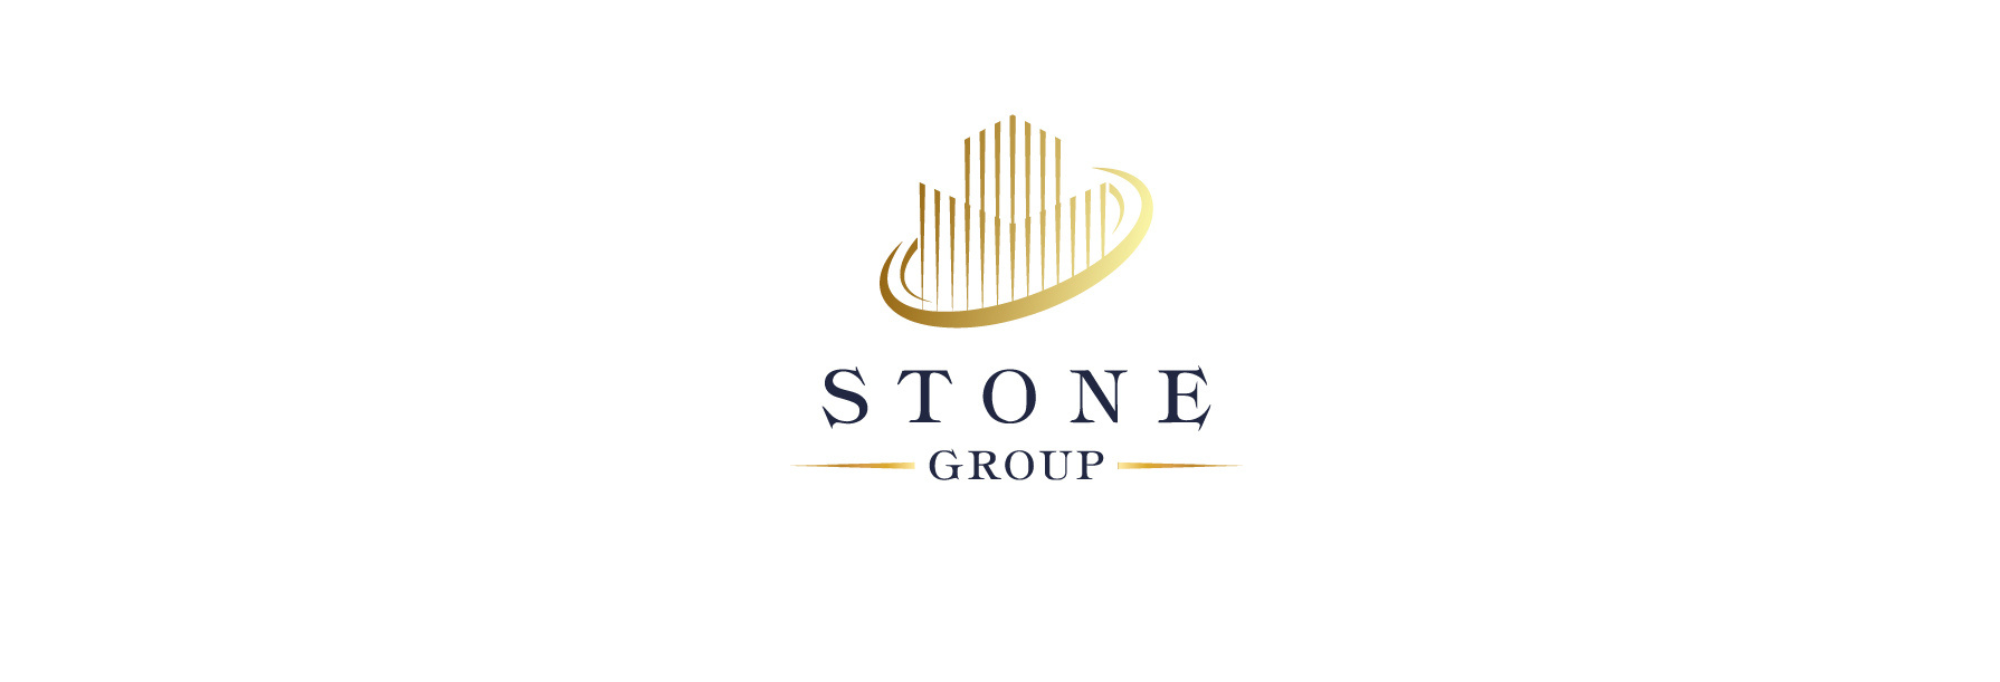 Stone Group Logo.png